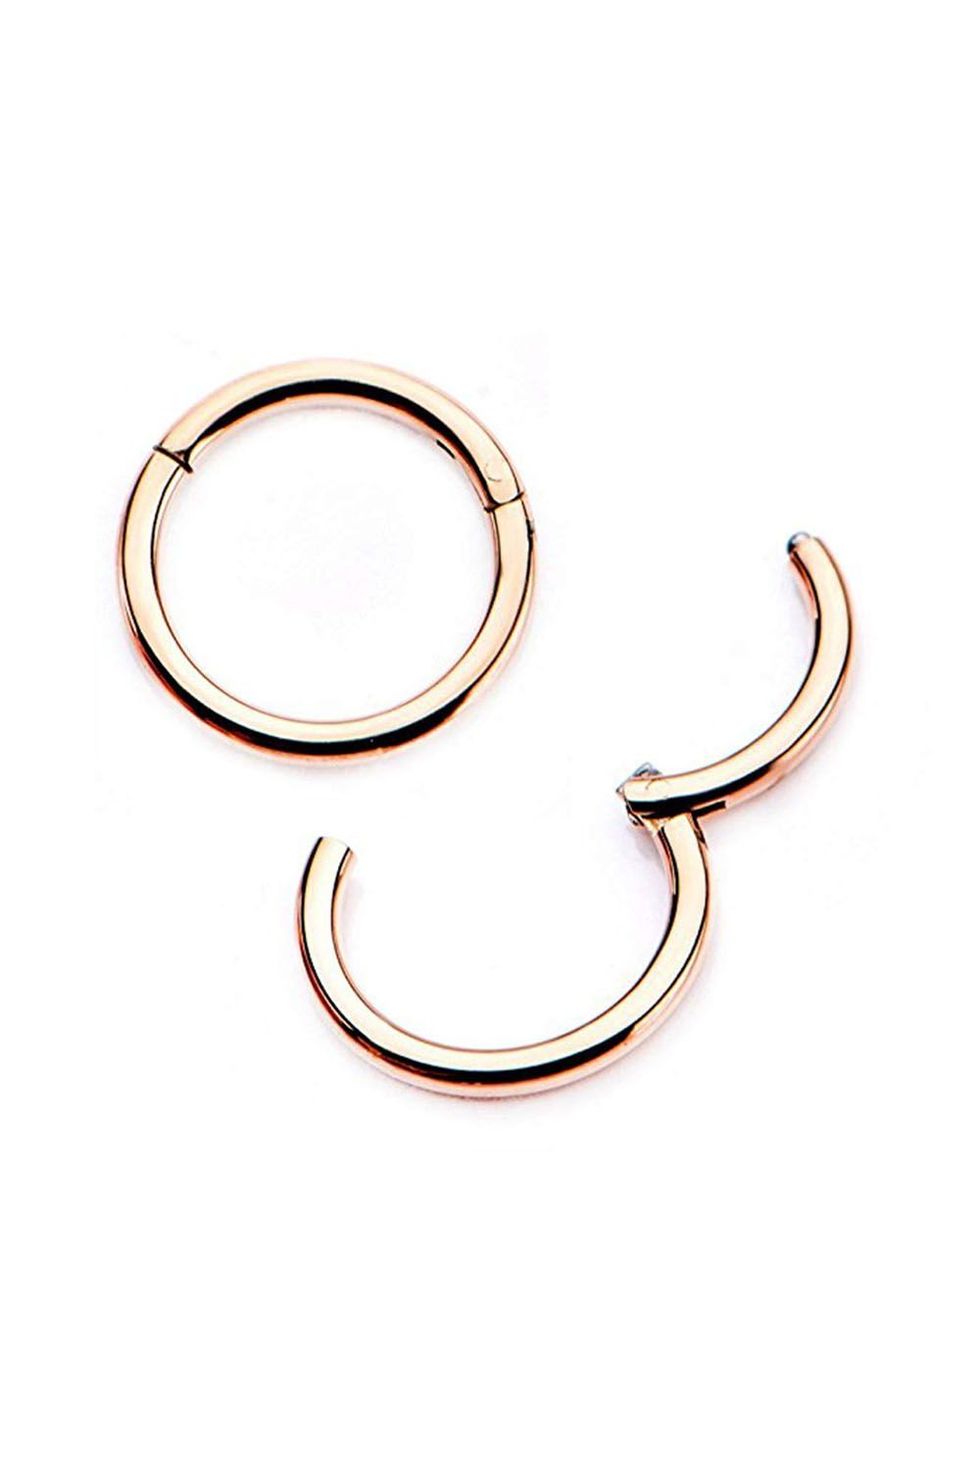 Jstyle 20G Hinged Nose Ring Hoop